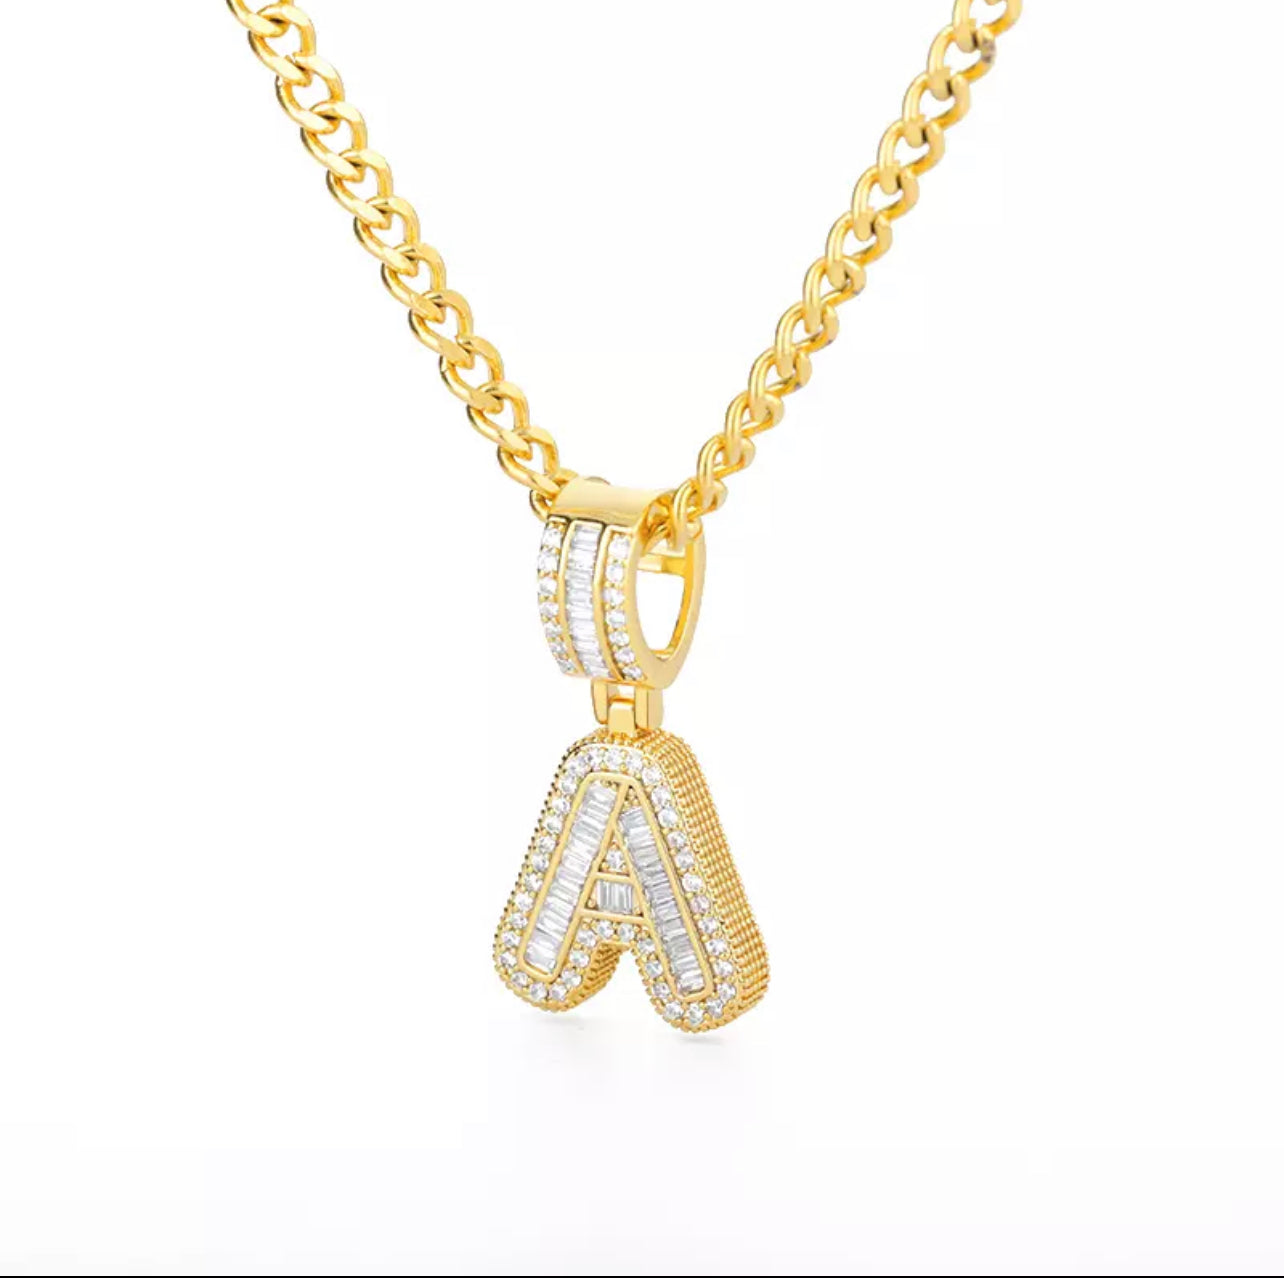 Slide-On Pave chunky Initial Necklace – helena rose jewelry